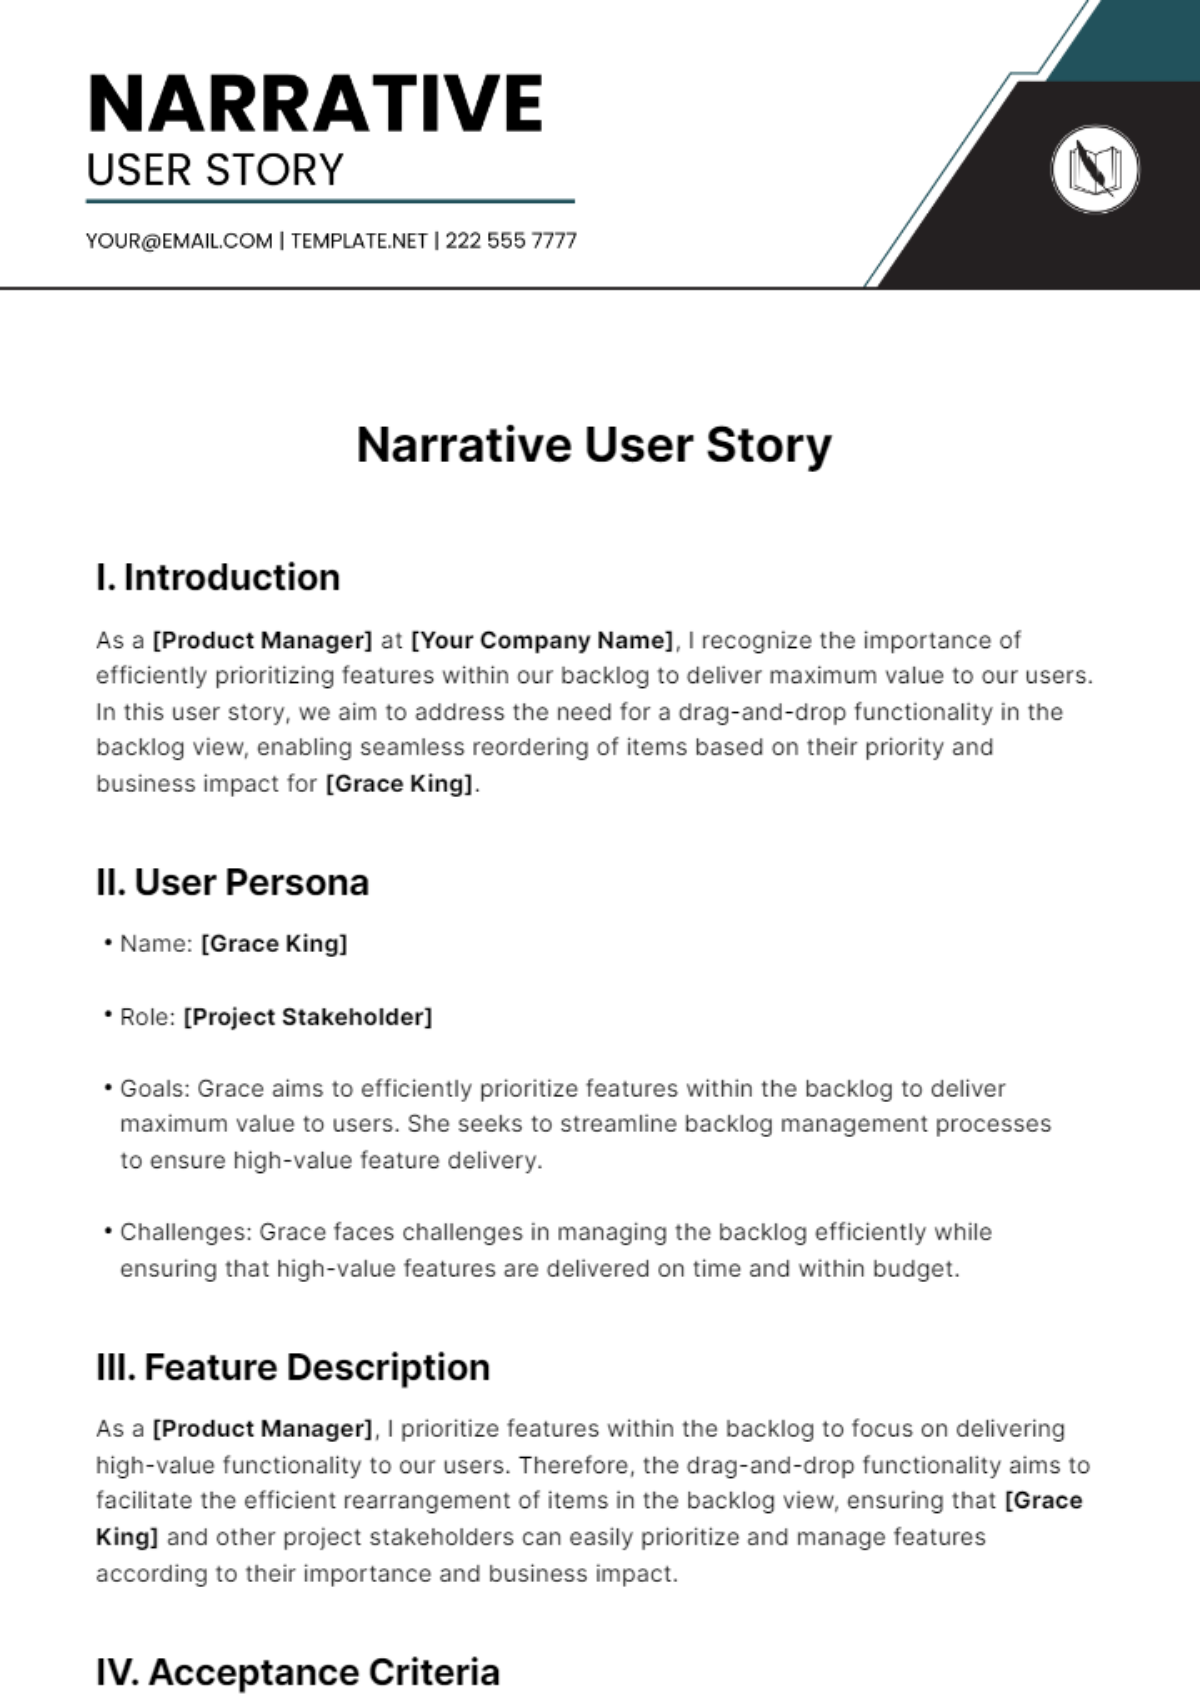 Narrative User Story Template